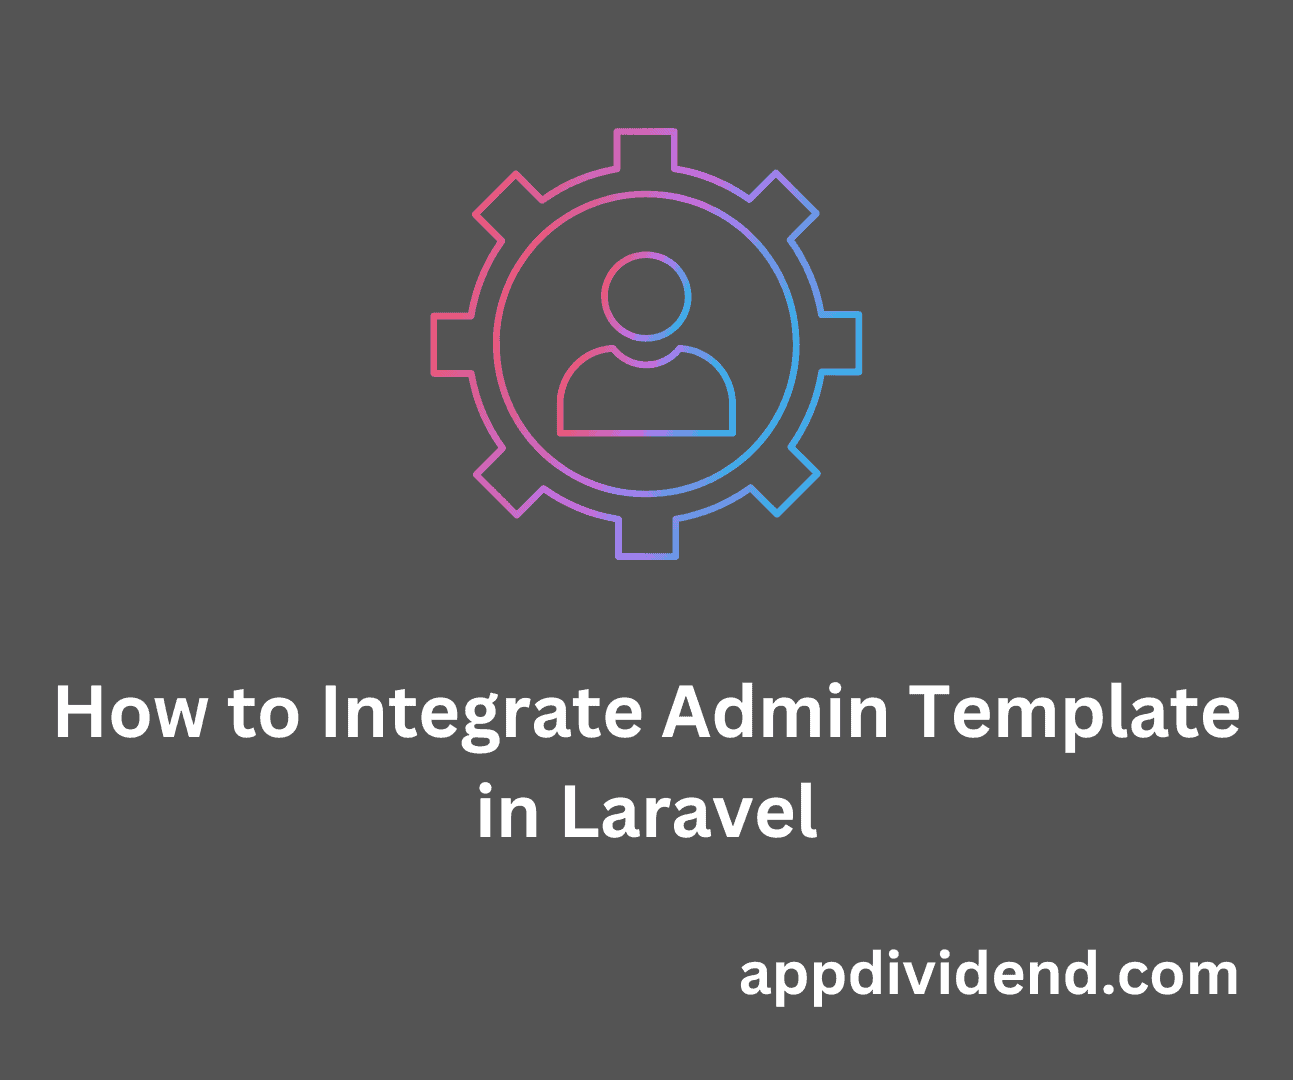 How to Integrate Admin Template in Laravel